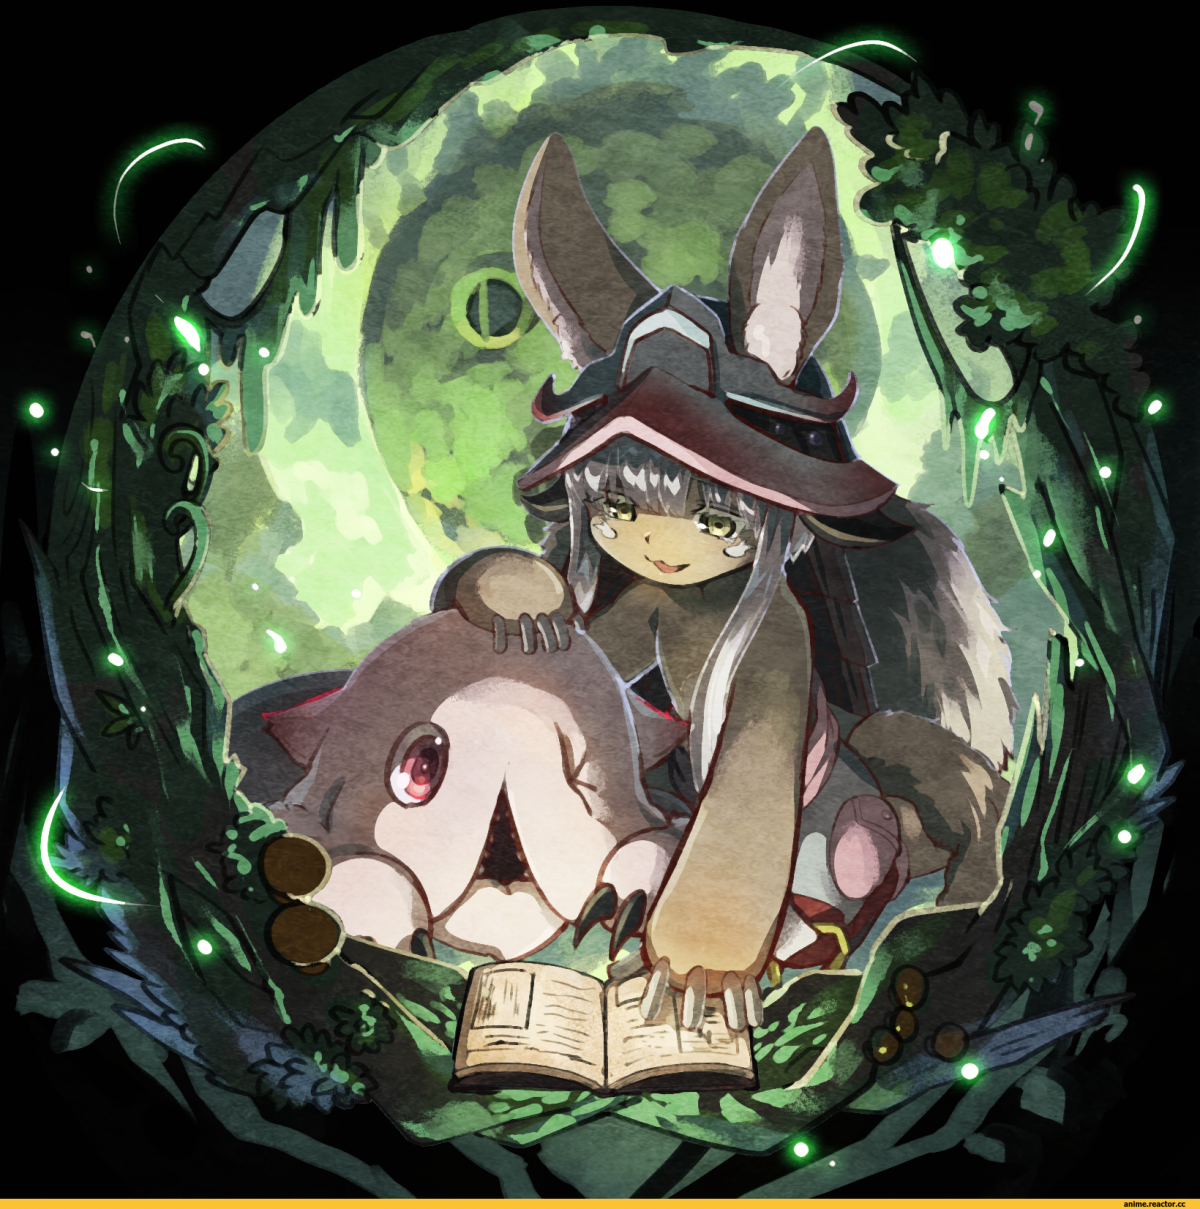 Митти made in Abyss.